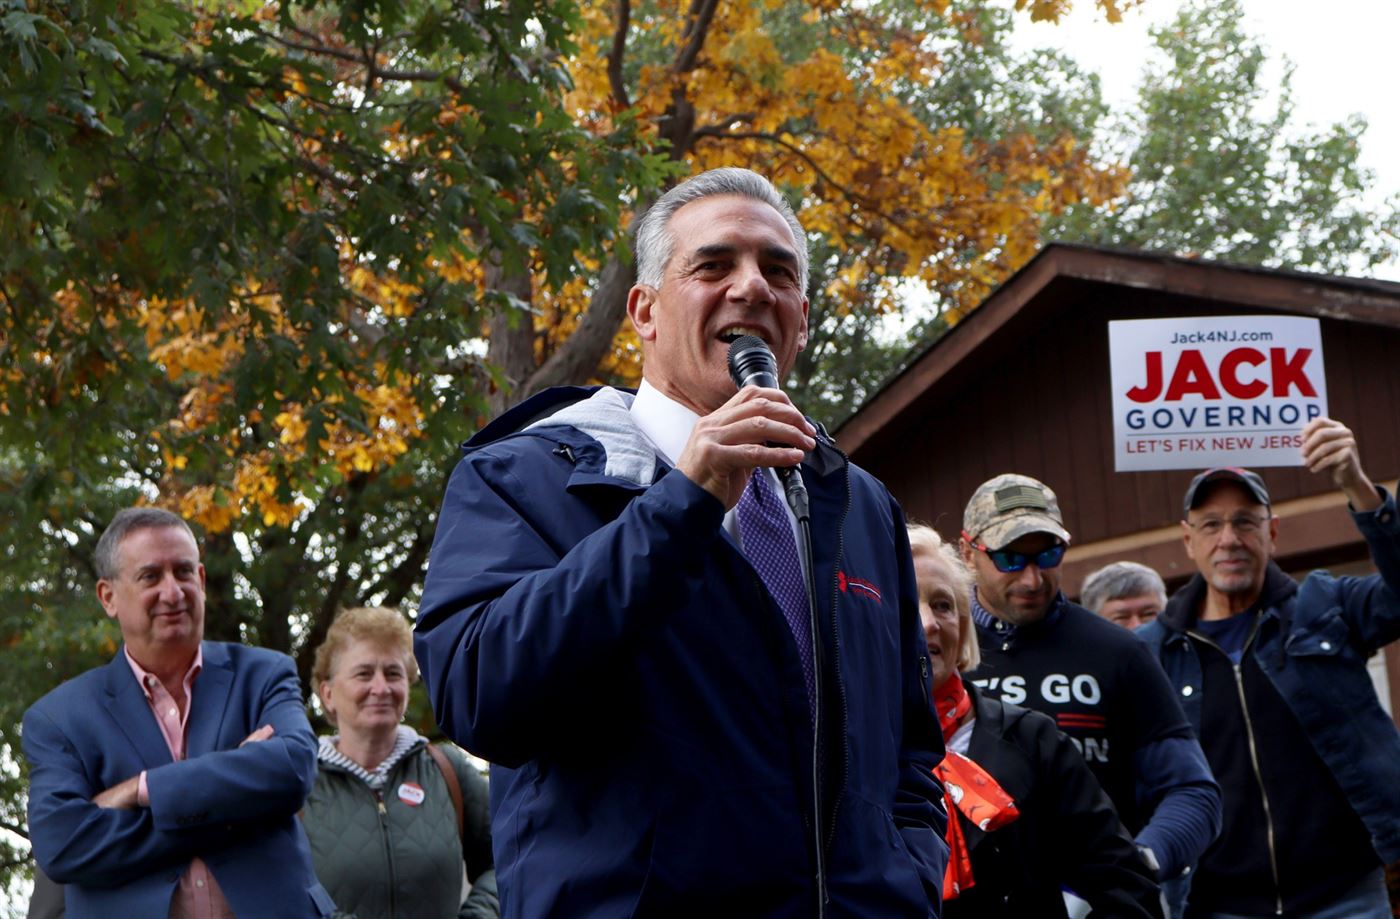 Republican gubernatorial candidate Jack Ciattarelli speaks with supporters during a rally in Bridgewater, New Jersey. John LaRosa | The Montclarion